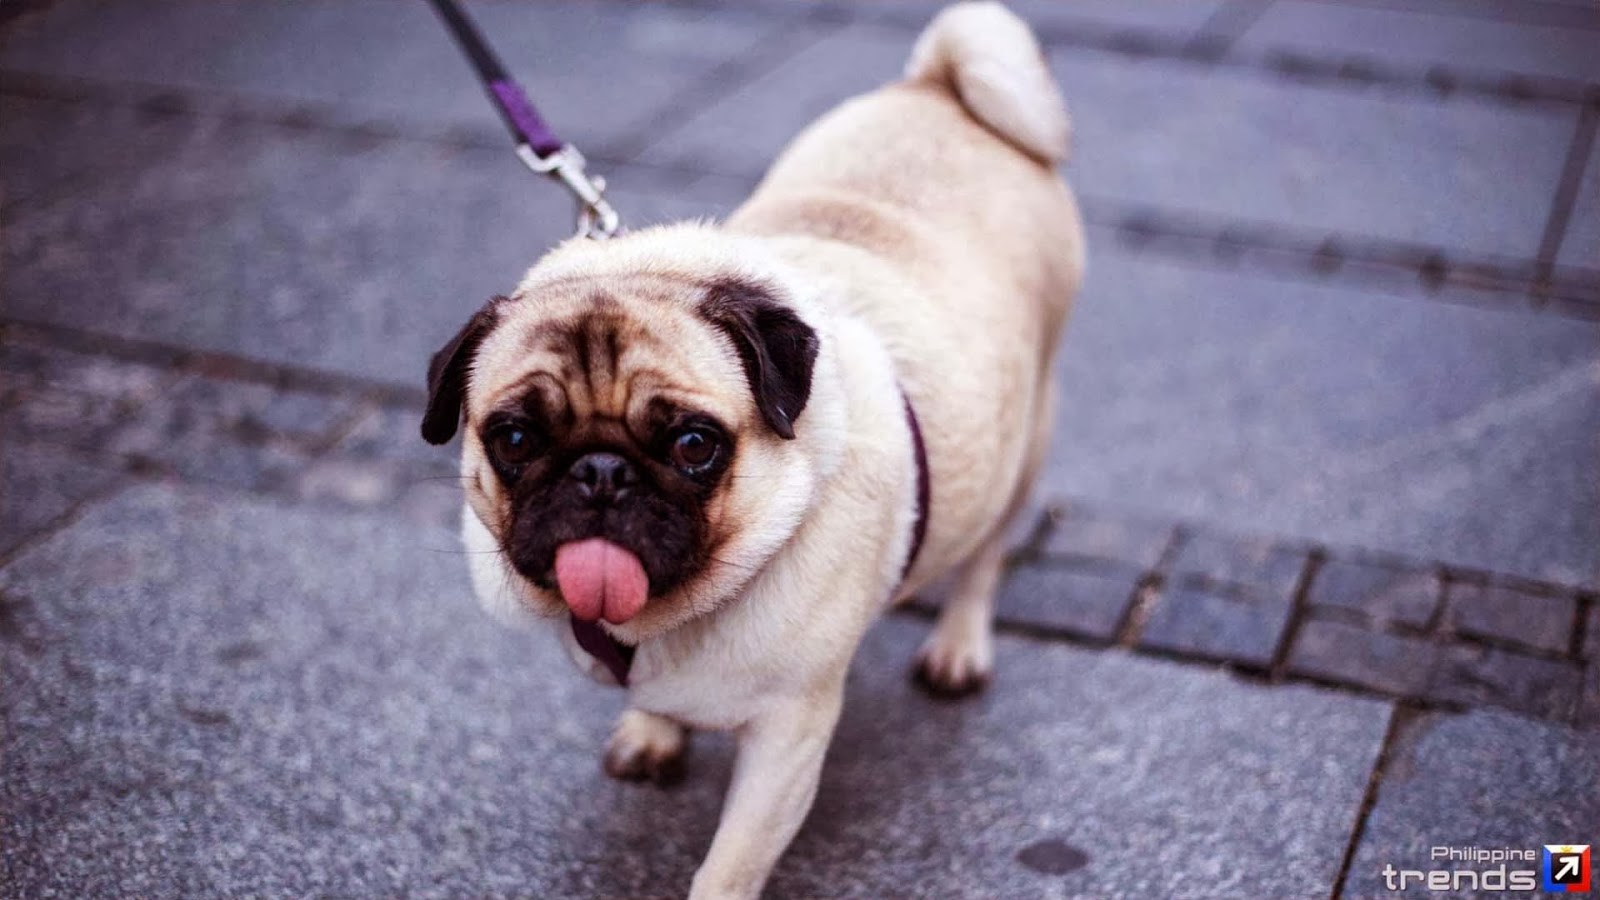 Pug Dog Images In Hd - HD Wallpaper 